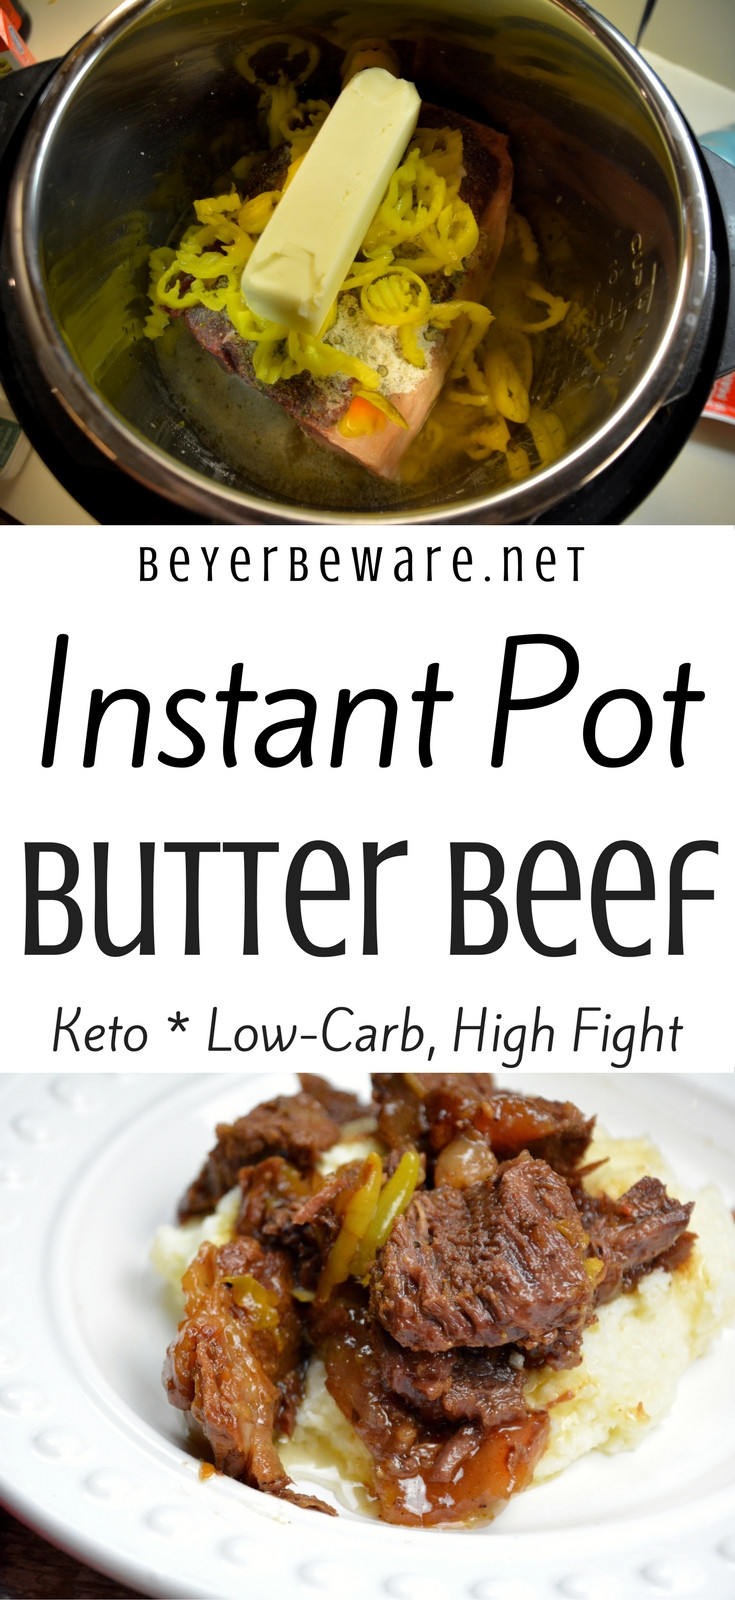 Butter Beef Keto
 Instant Pot Butter Beef Keto Low Carb Recipe Beyer Beware